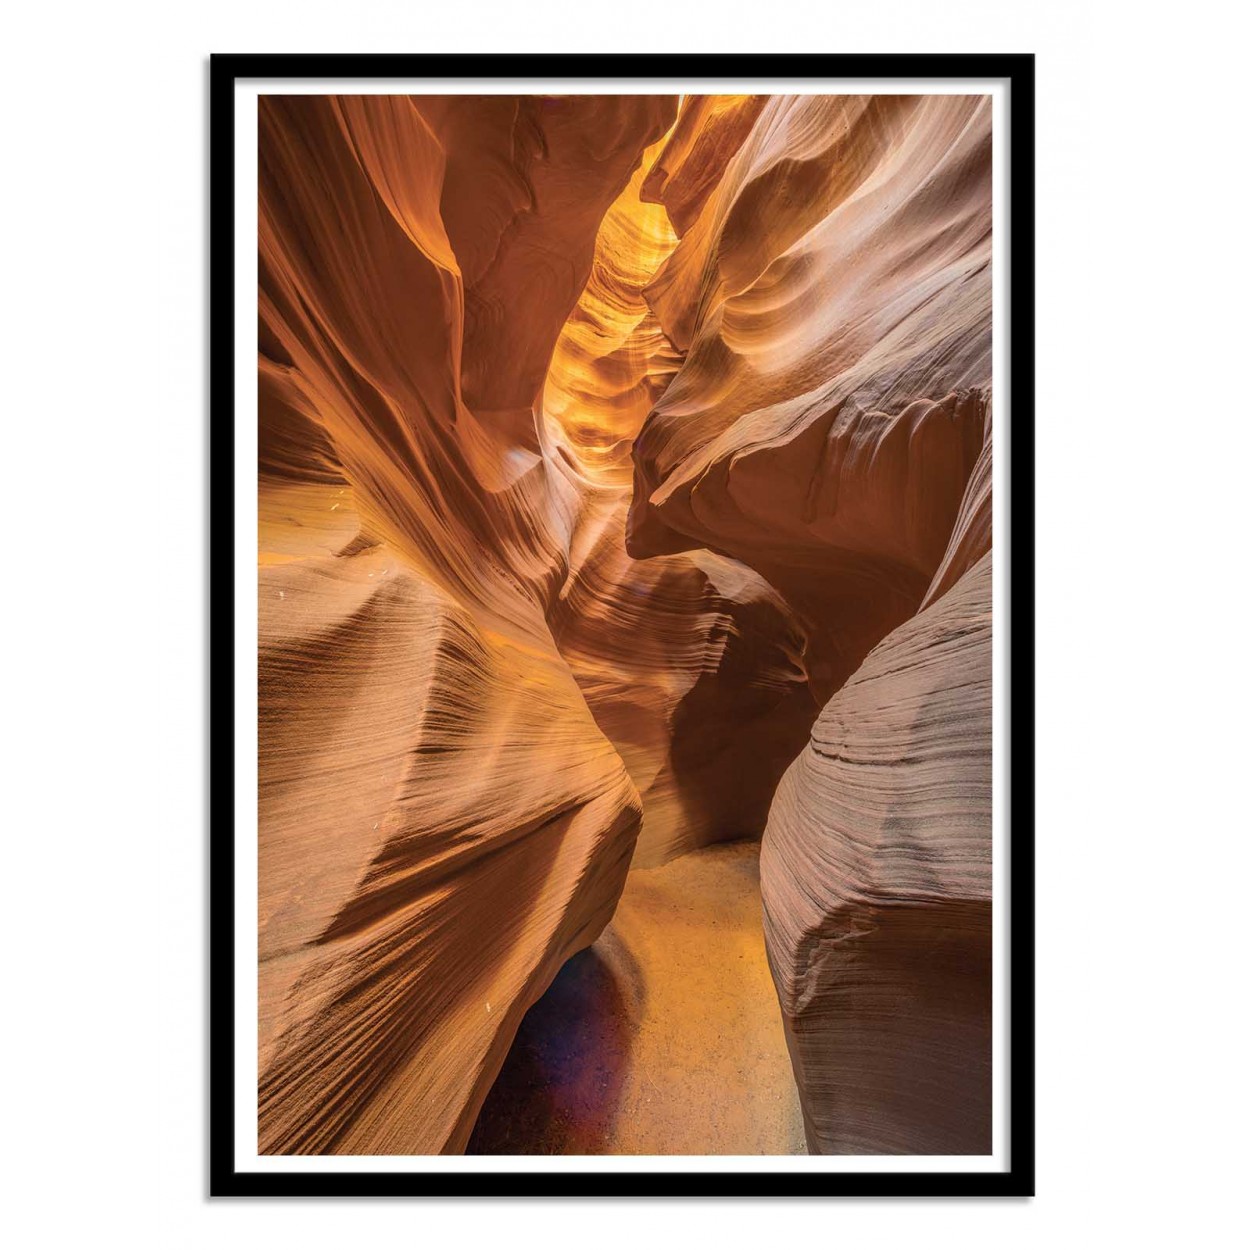 Photography Arty on Print for home decoration - The golden passage way